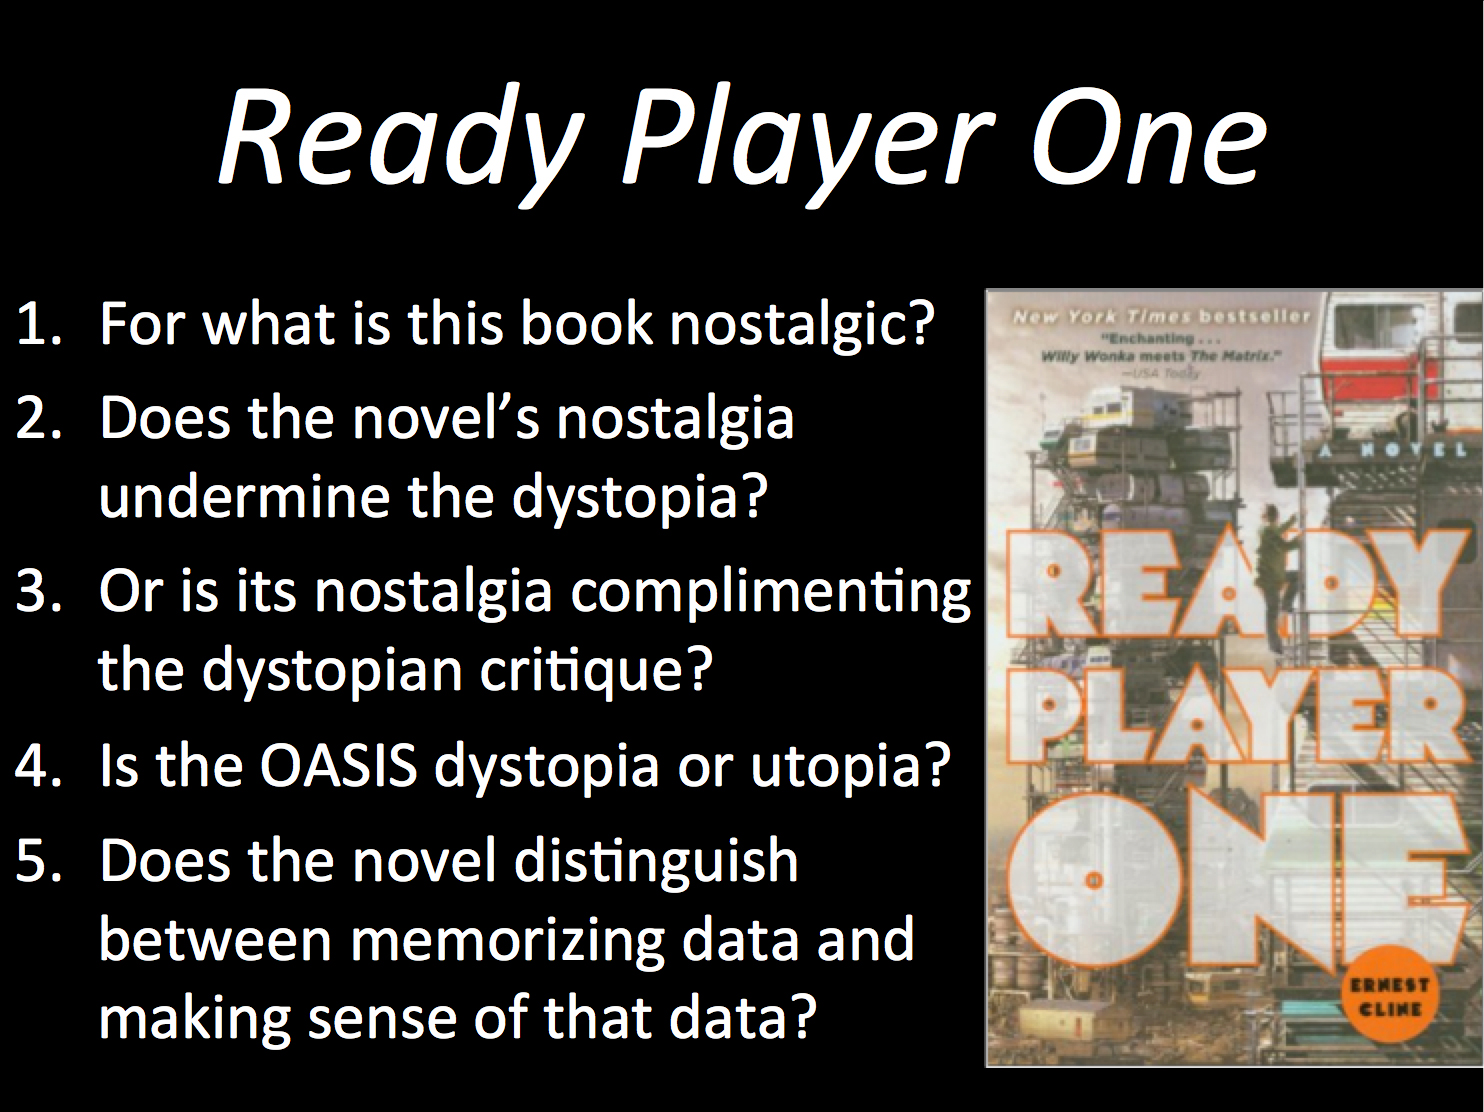 Ready Player One: Questions